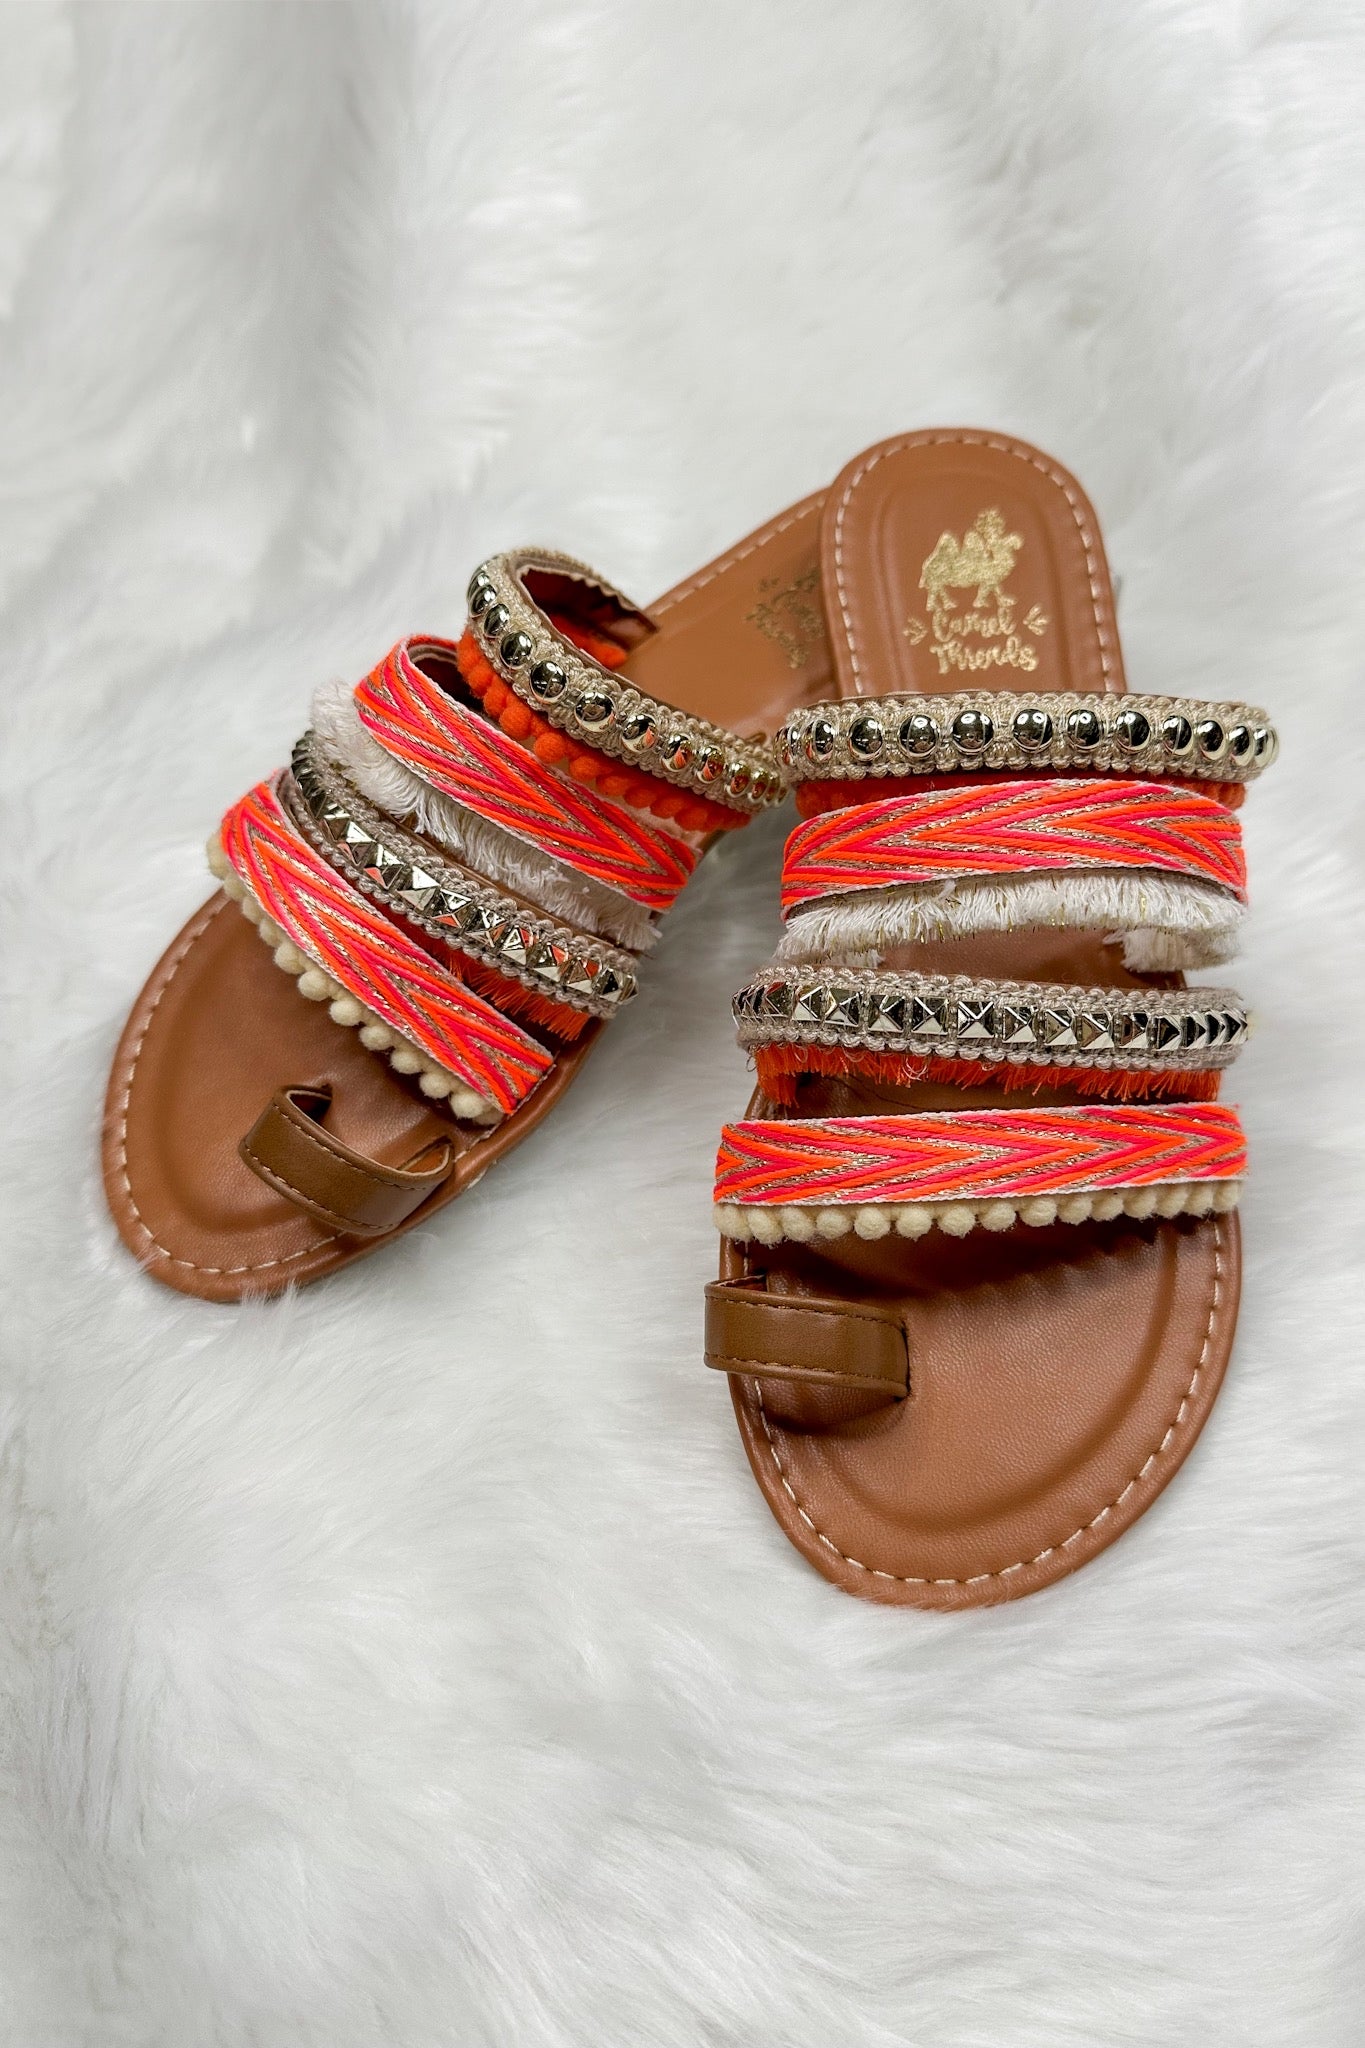 Multi Strap Boho Woven Studded Camel Threads Sandal in Coral